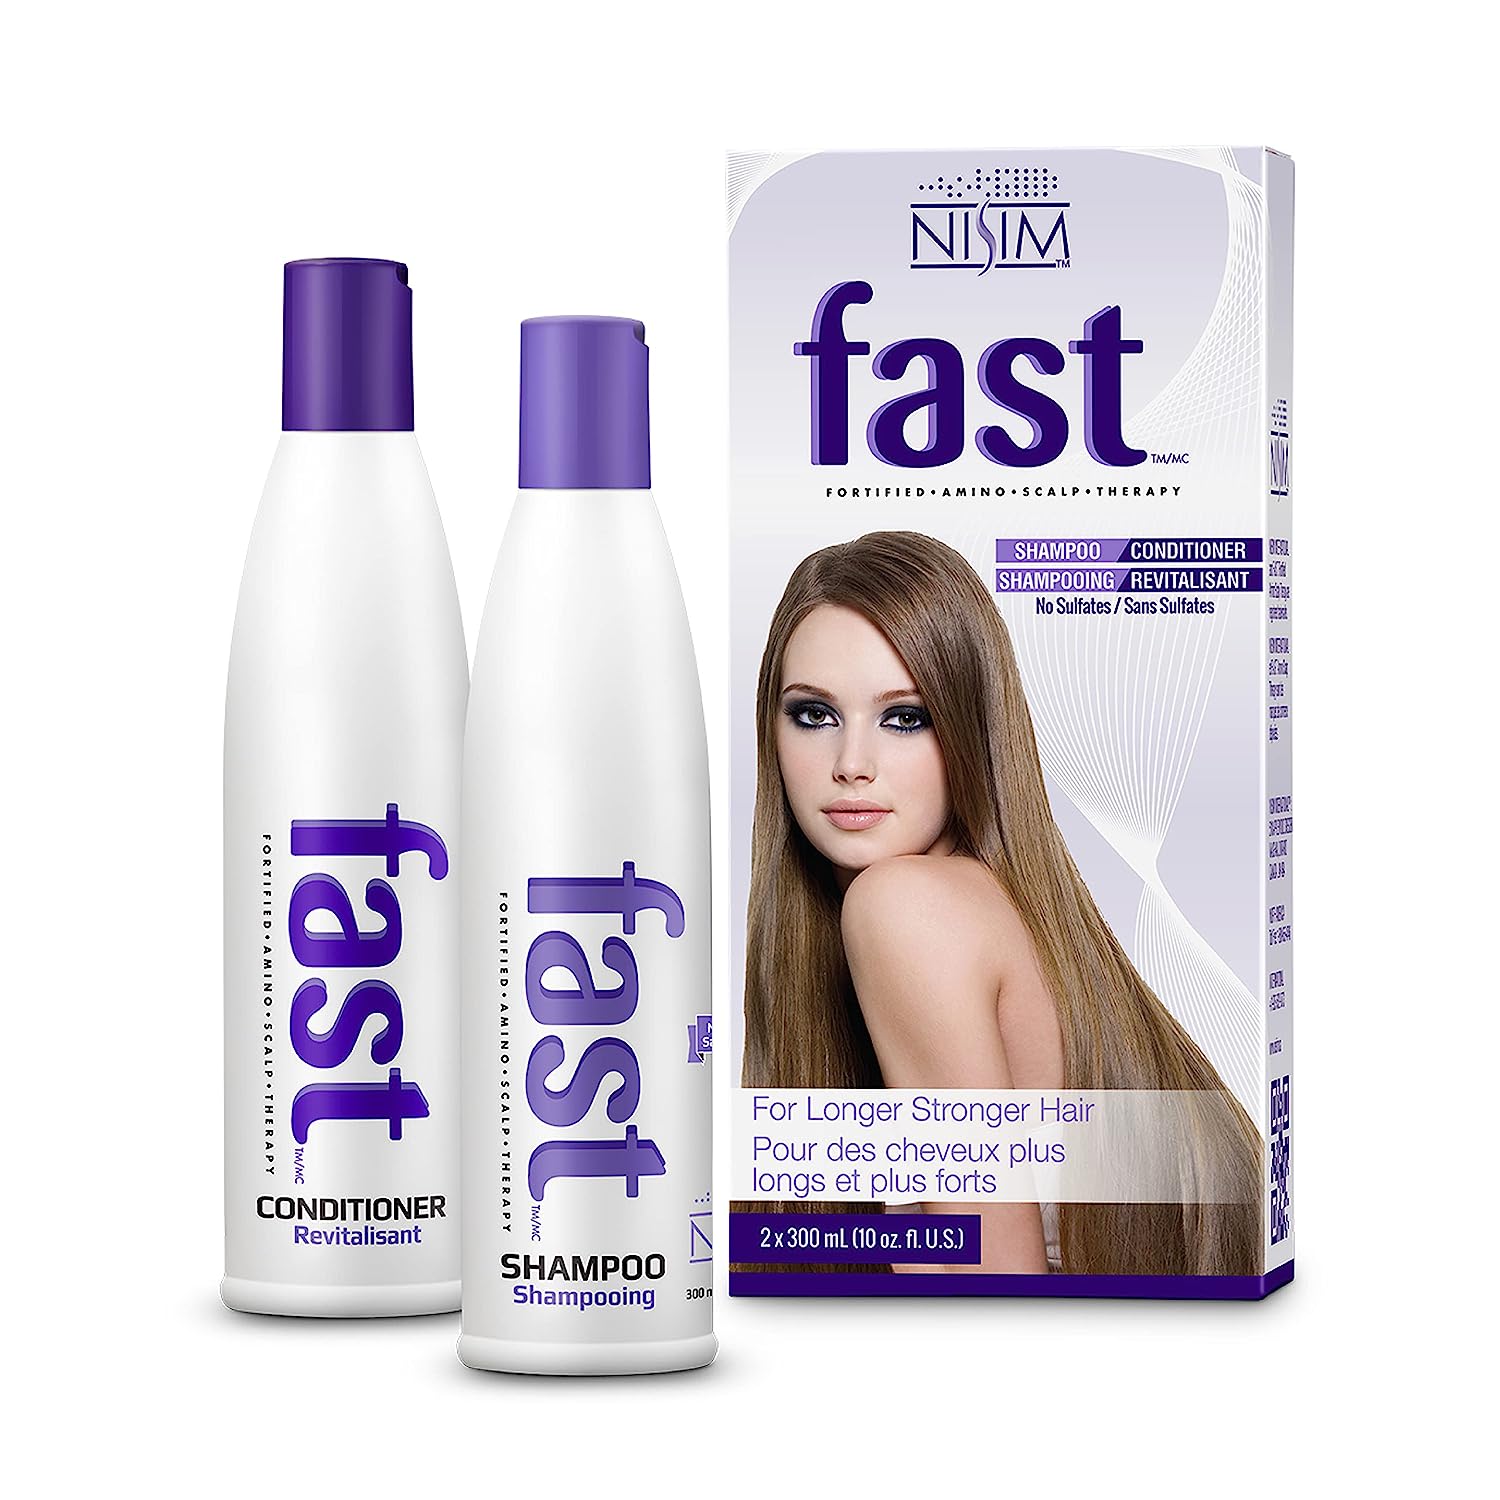 shampoo and conditioner for fast hair growth comparison tables